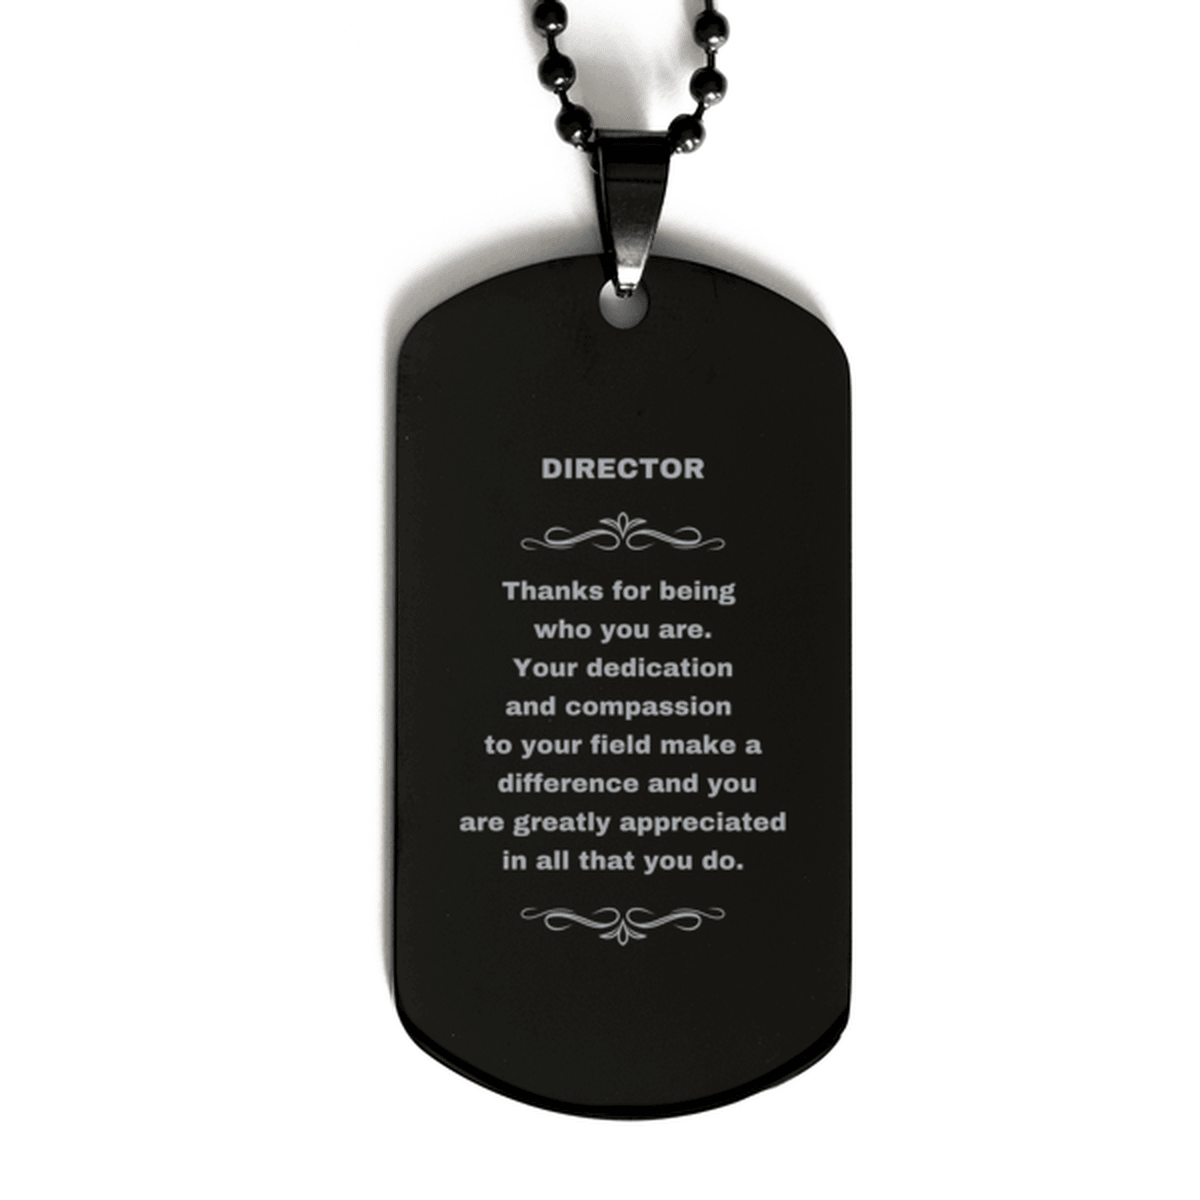 Director Black Dog Tag Necklace Engraved Bracelet - Thanks for being who you are - Birthday Christmas Jewelry Gifts Coworkers Colleague Boss - Mallard Moon Gift Shop